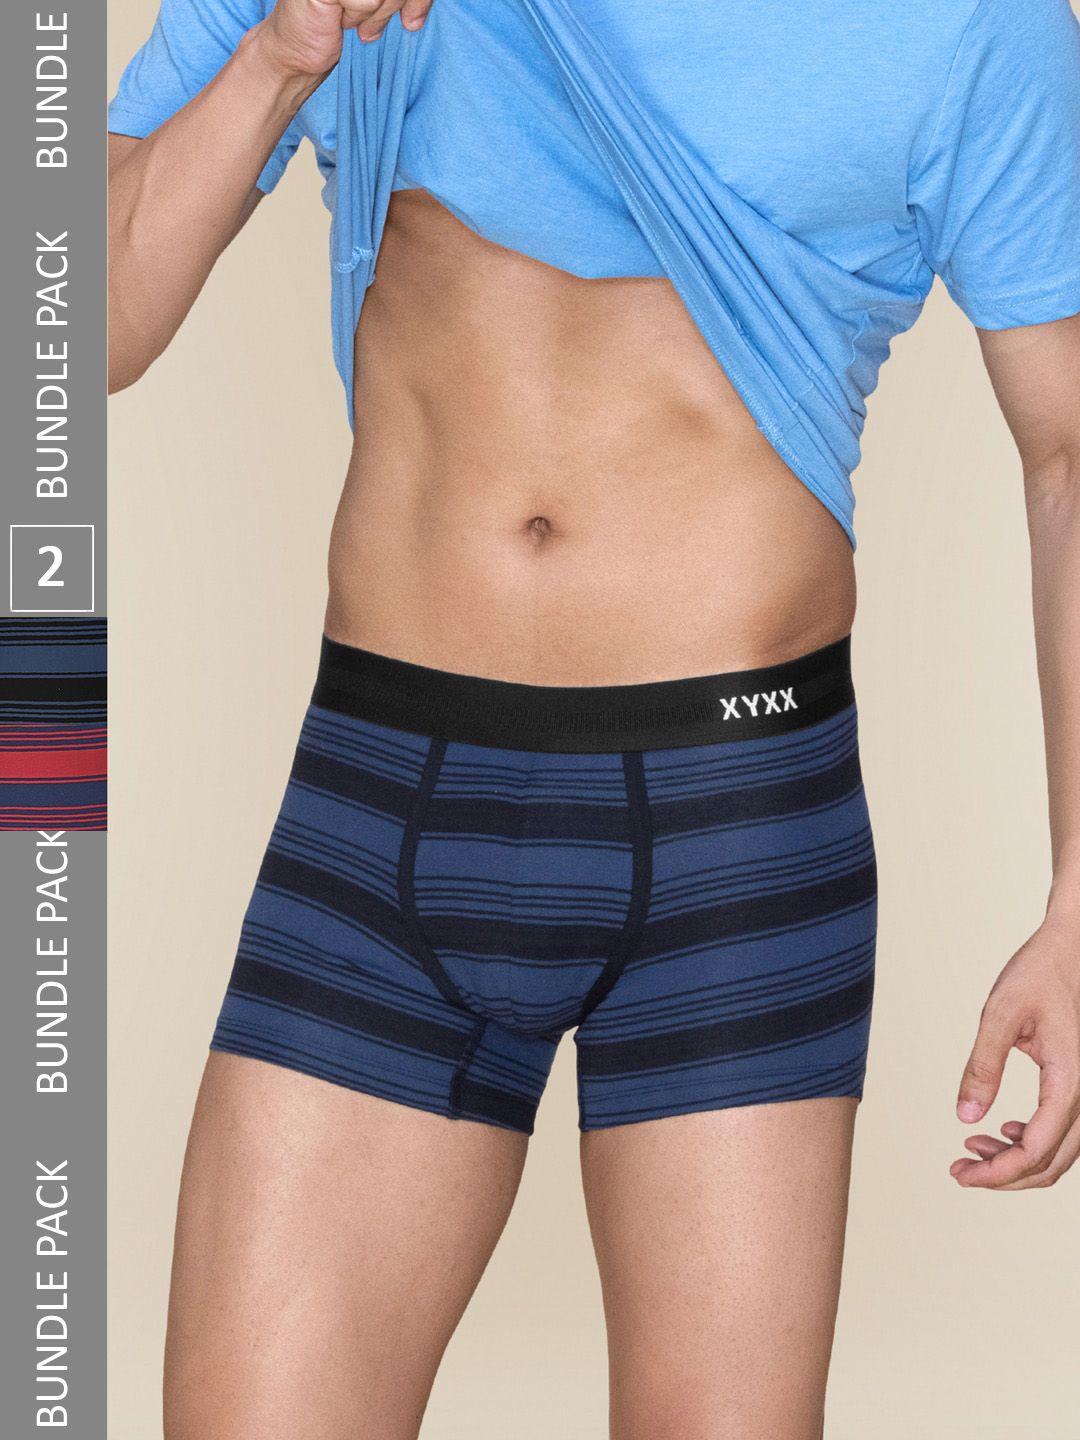 xyxx men striped pack of 2 streax intellieaze super combed cotton trunk xytrnk2pckn582